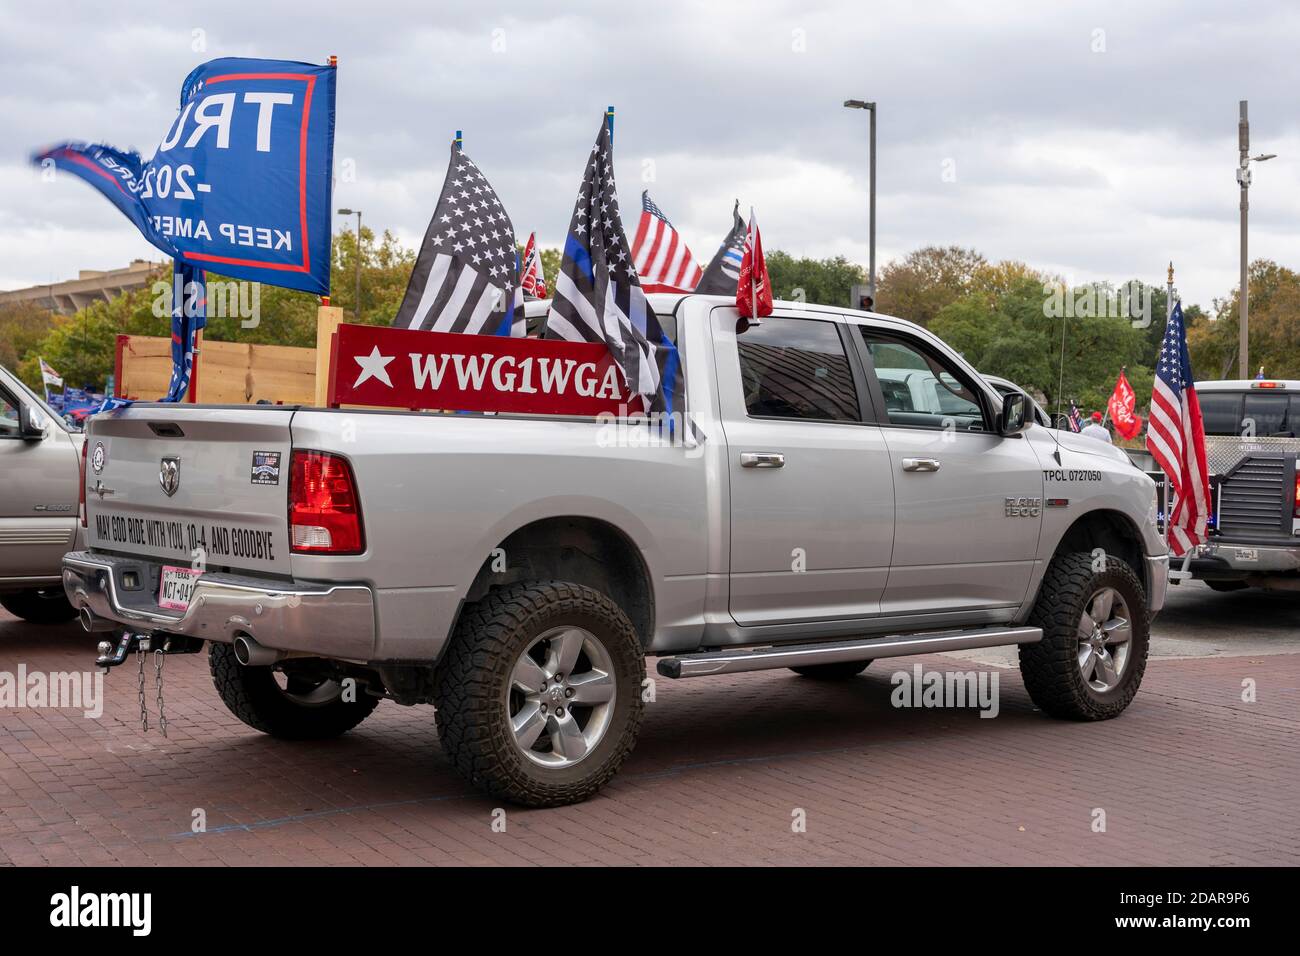 Truck during the Million MAGA March in Dallas, Texas Stock Photo